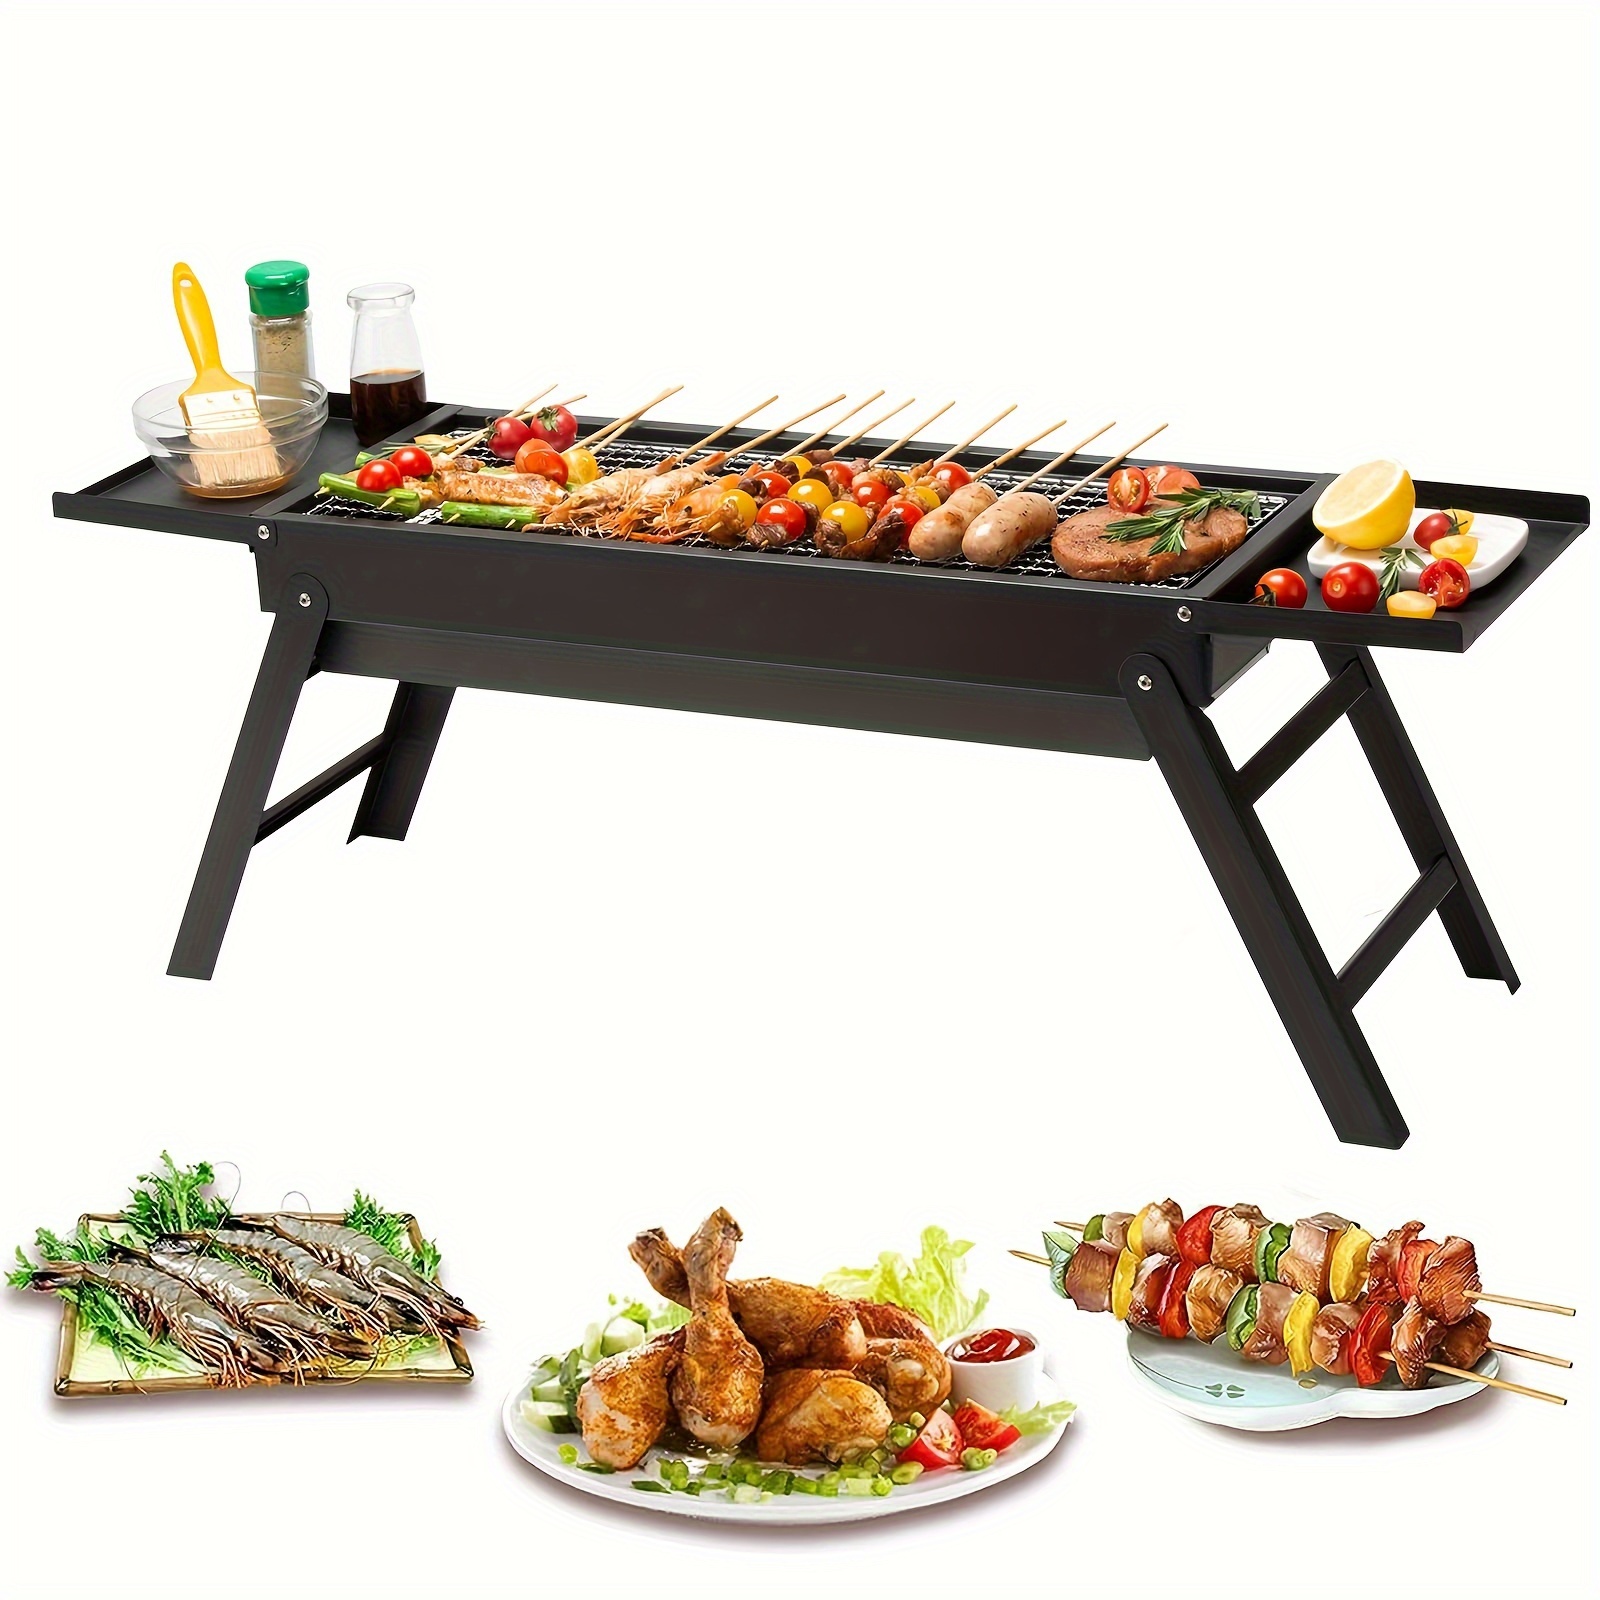 BBQ-Toro Ceramic Table Grill with Wooden Underlay, 50 x 23 x 17 cm, Hibachi  Table Grill without Electricity, Grey, Mini Grill, Table Grill Charcoal,  Charcoal Grill, Camping Grill, Mini Grill Charcoal 